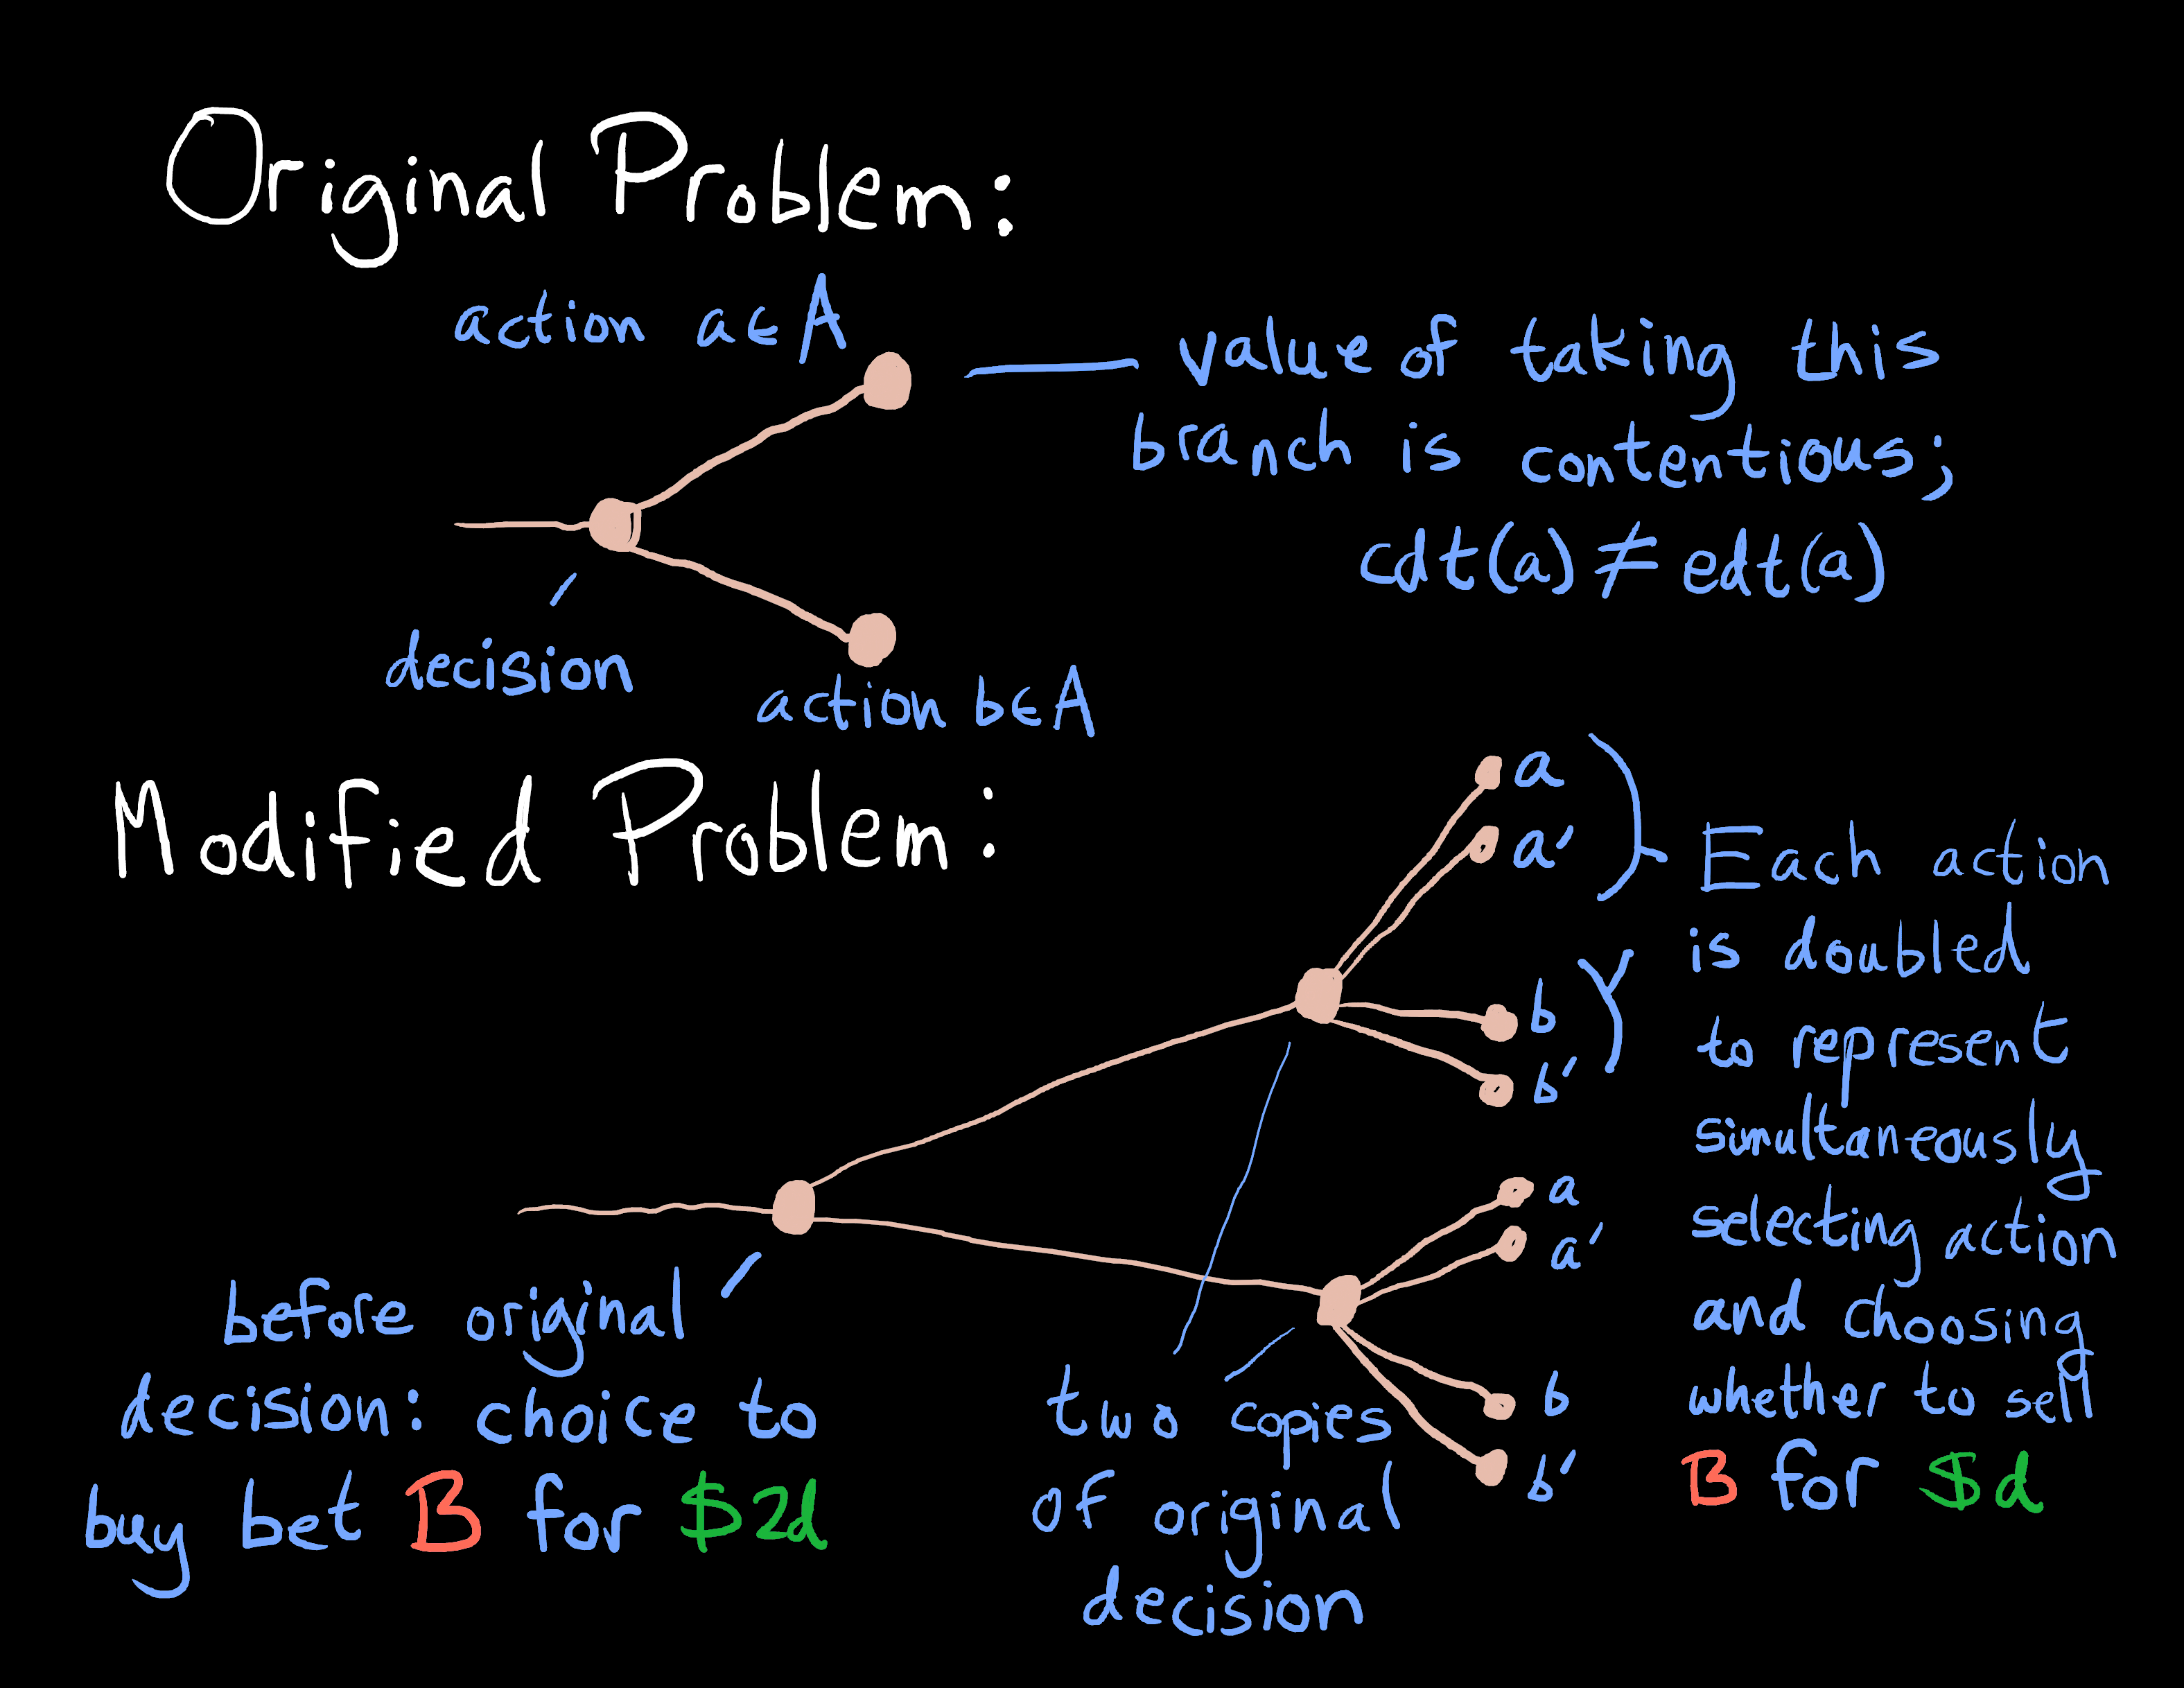 Illustration of how the decision problem is modified.